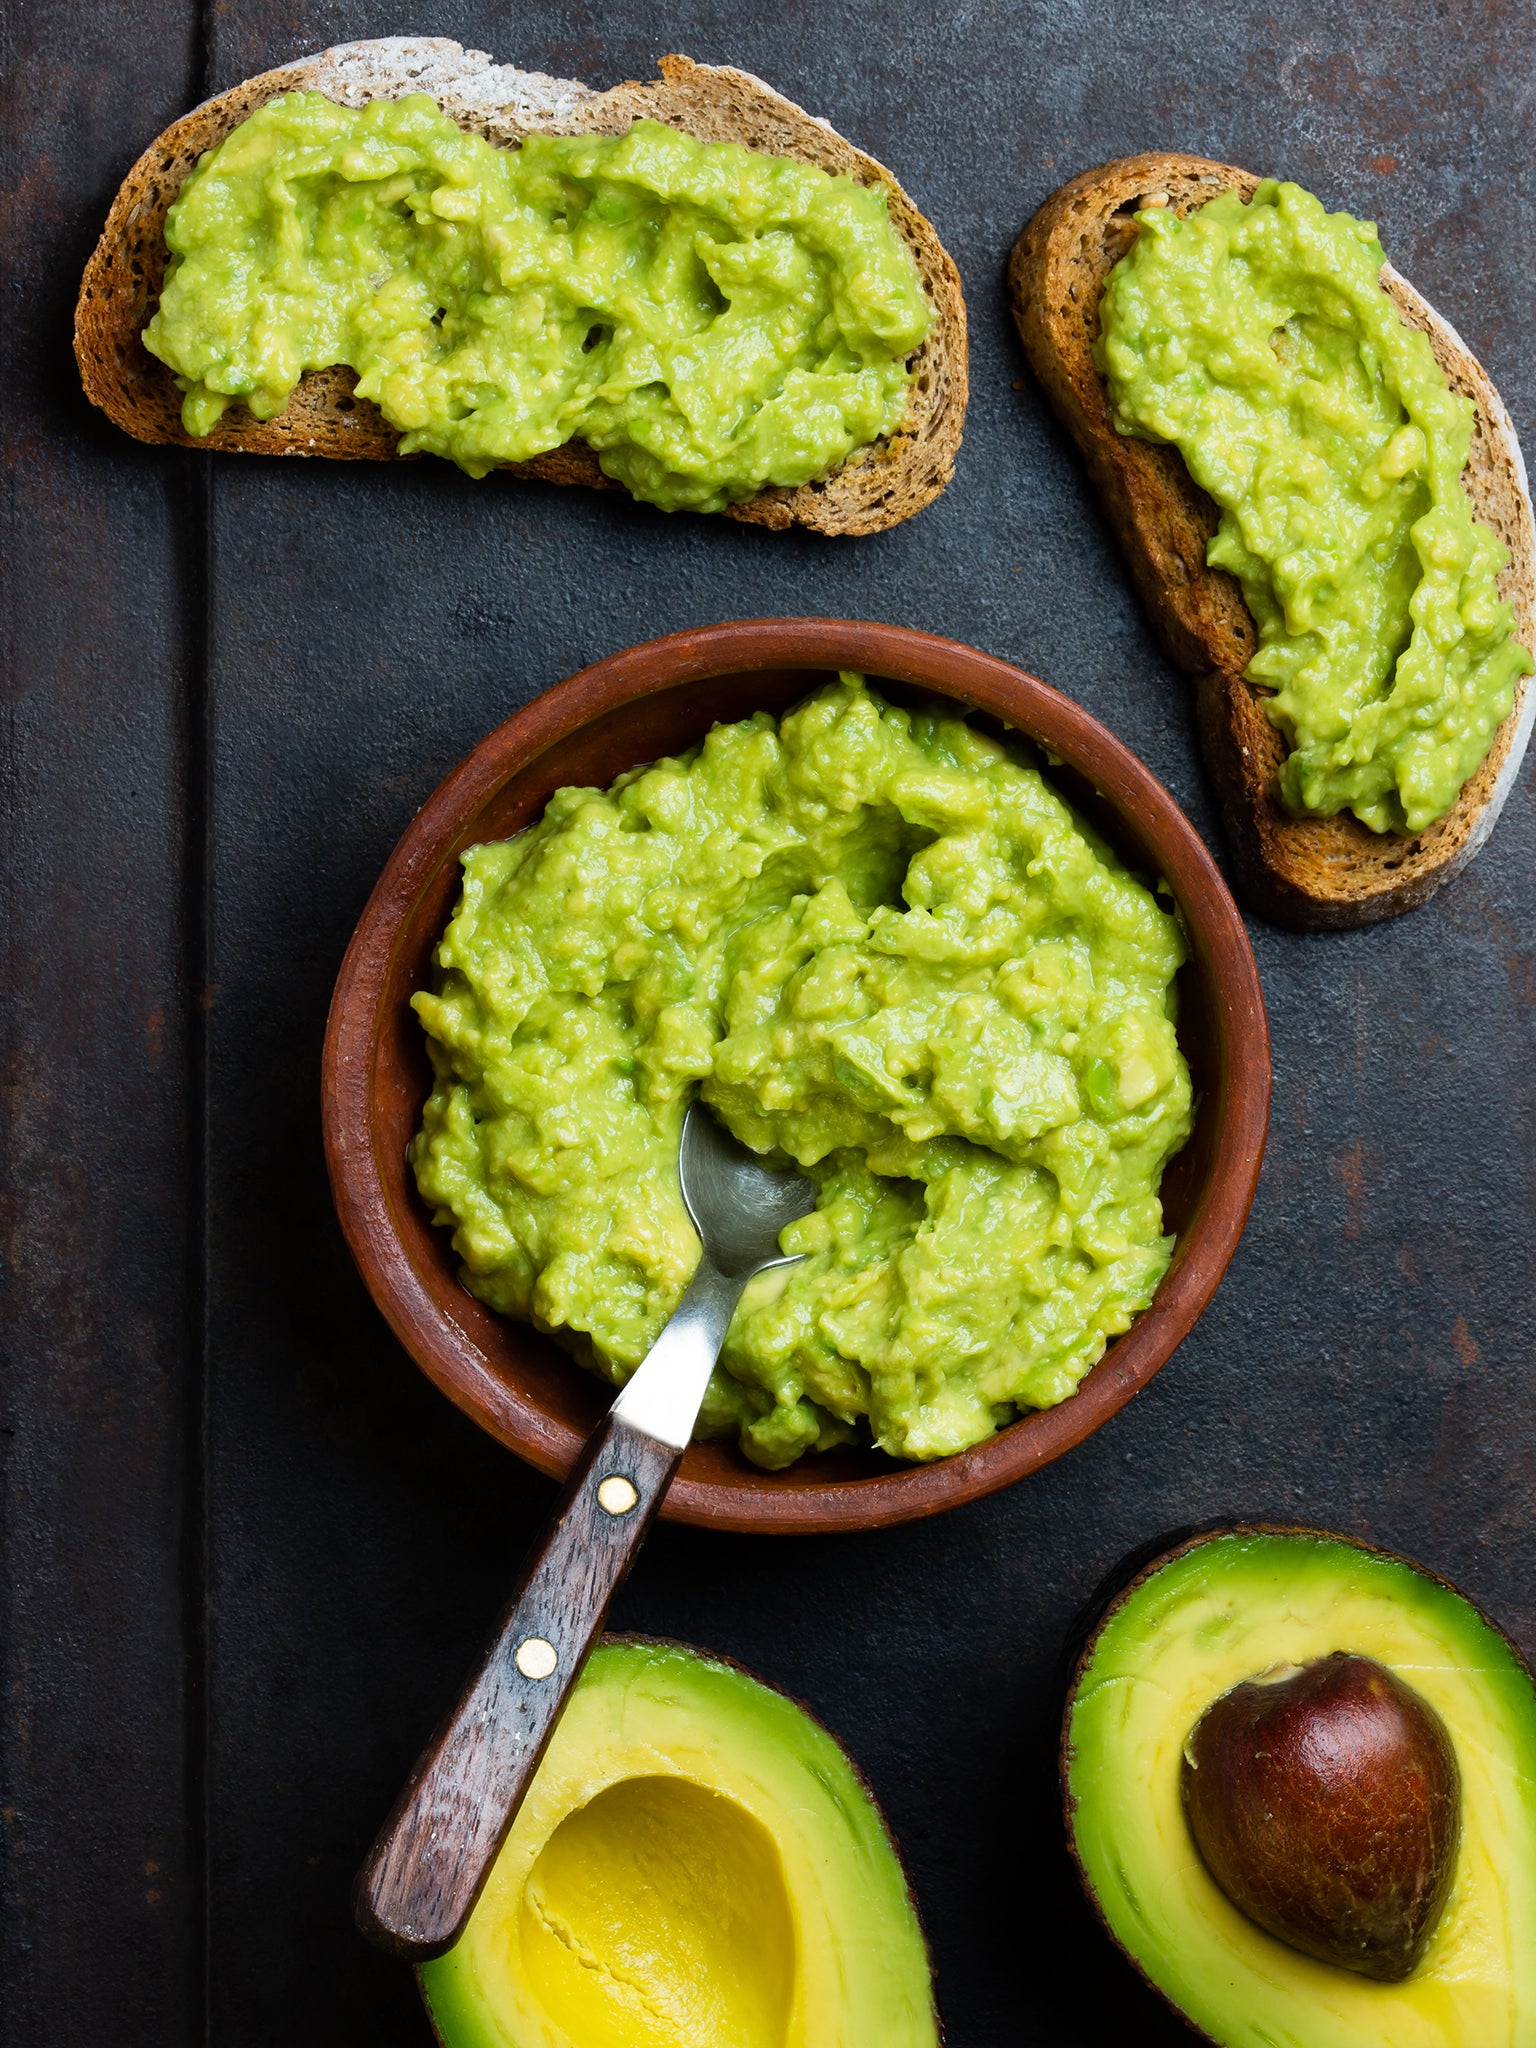 Guacamole is your chance to prove (and share) your mettle